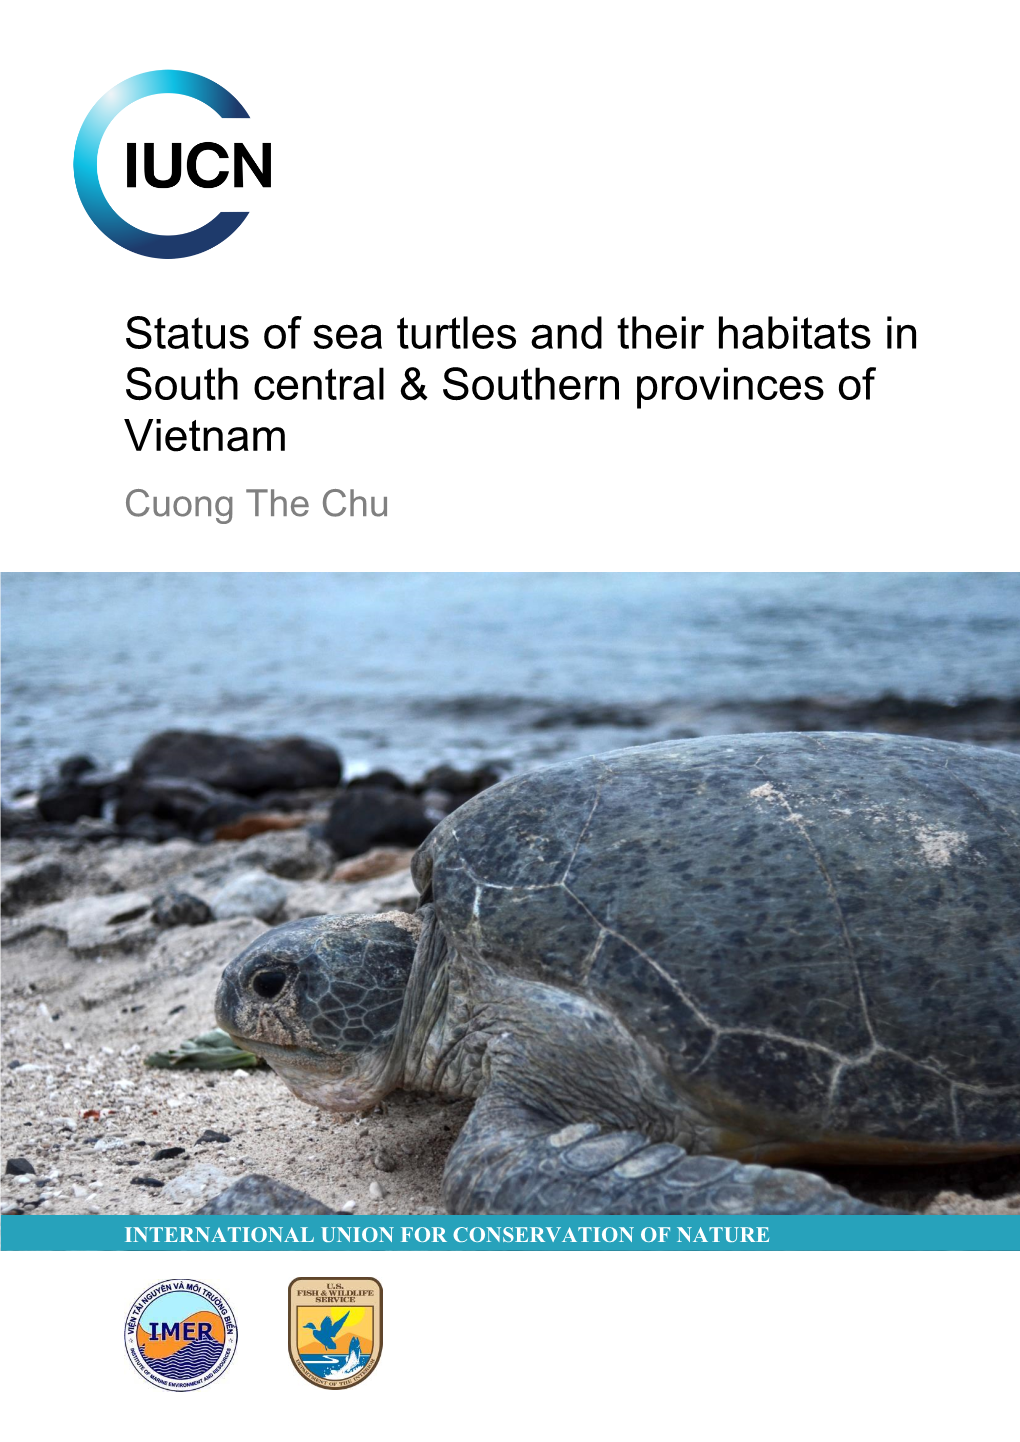 Status of Sea Turtles and Their Habitats in South Central & Southern